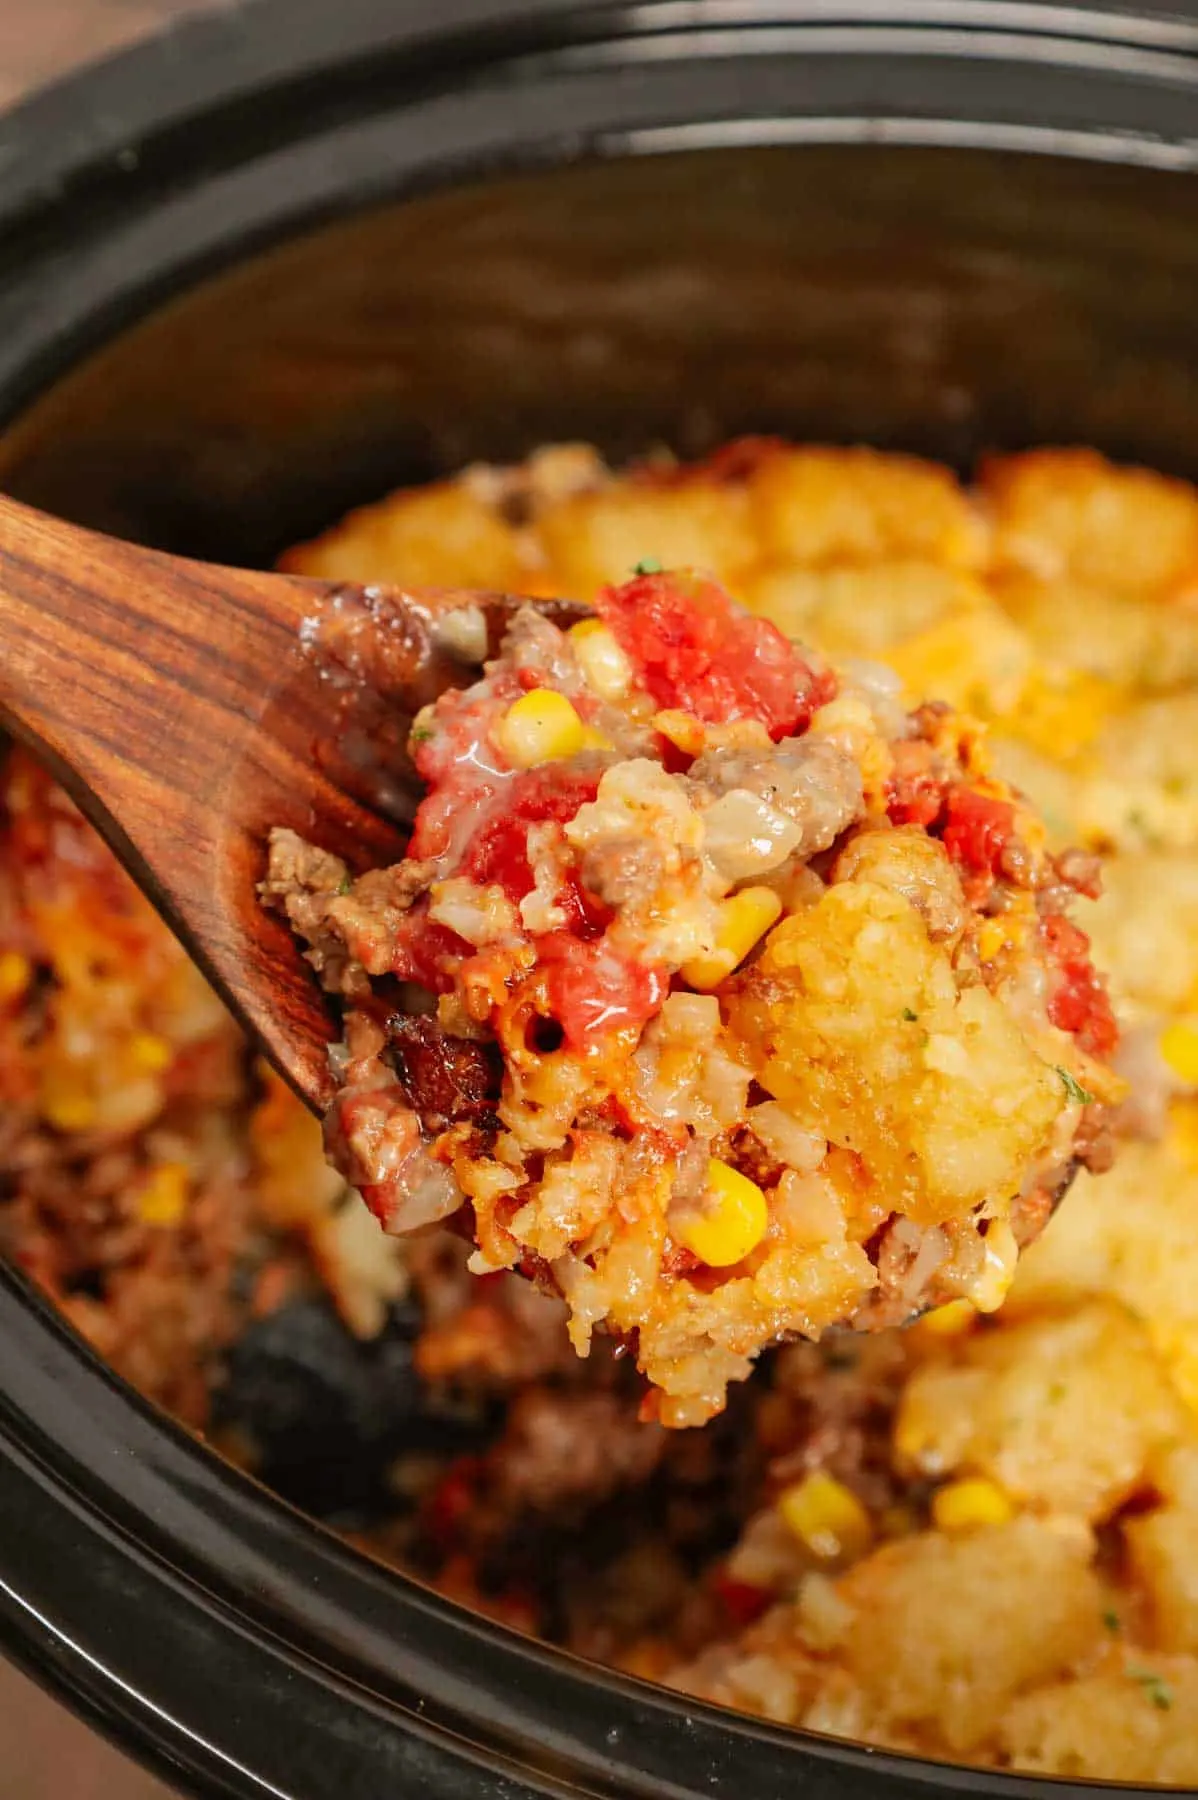 Crock Pot Tater Tot Casserole is a hearty slow cooker dish loaded with ground beef, tater tots, corn, diced tomatoes, cream of mushroom soup and shredded cheddar cheese.